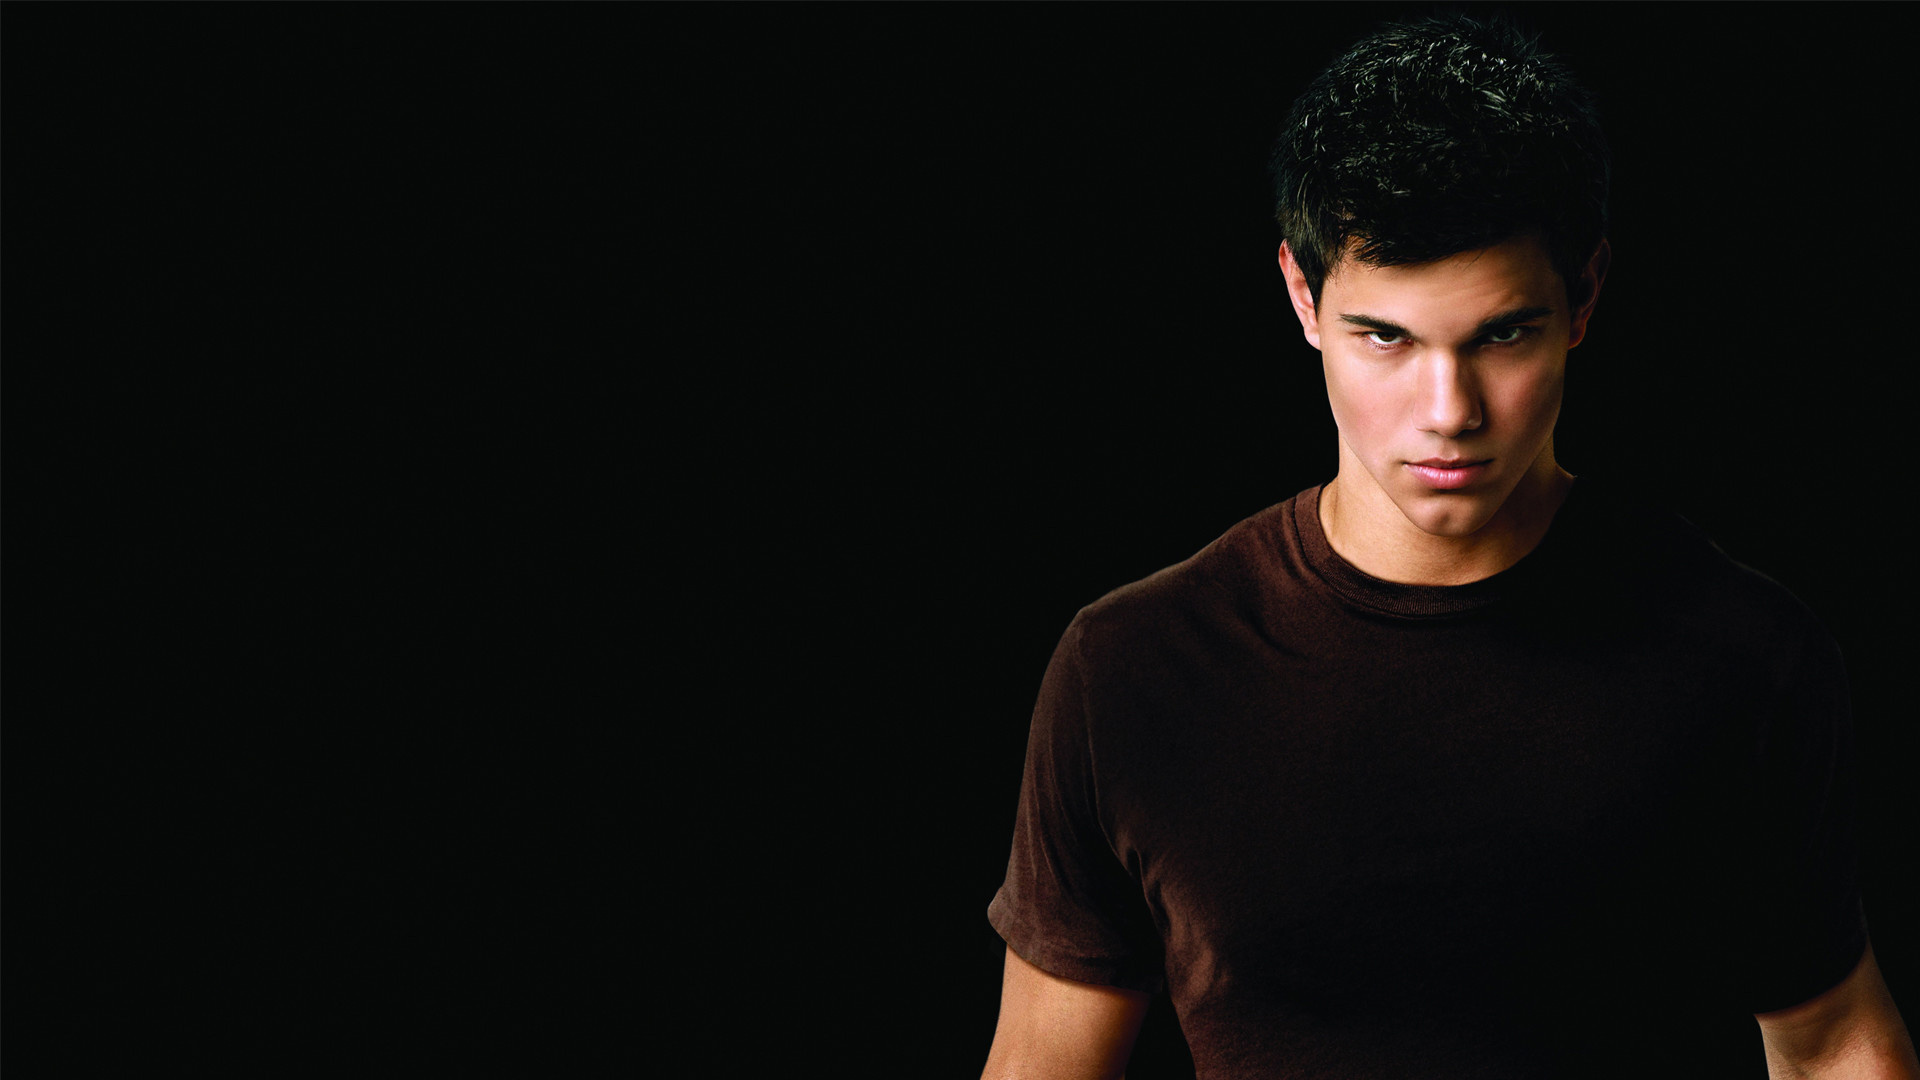 Taylor Lautner wallpapers, Stunning background pictures, Heartthrob actor, Teen idol, 1920x1080 Full HD Desktop